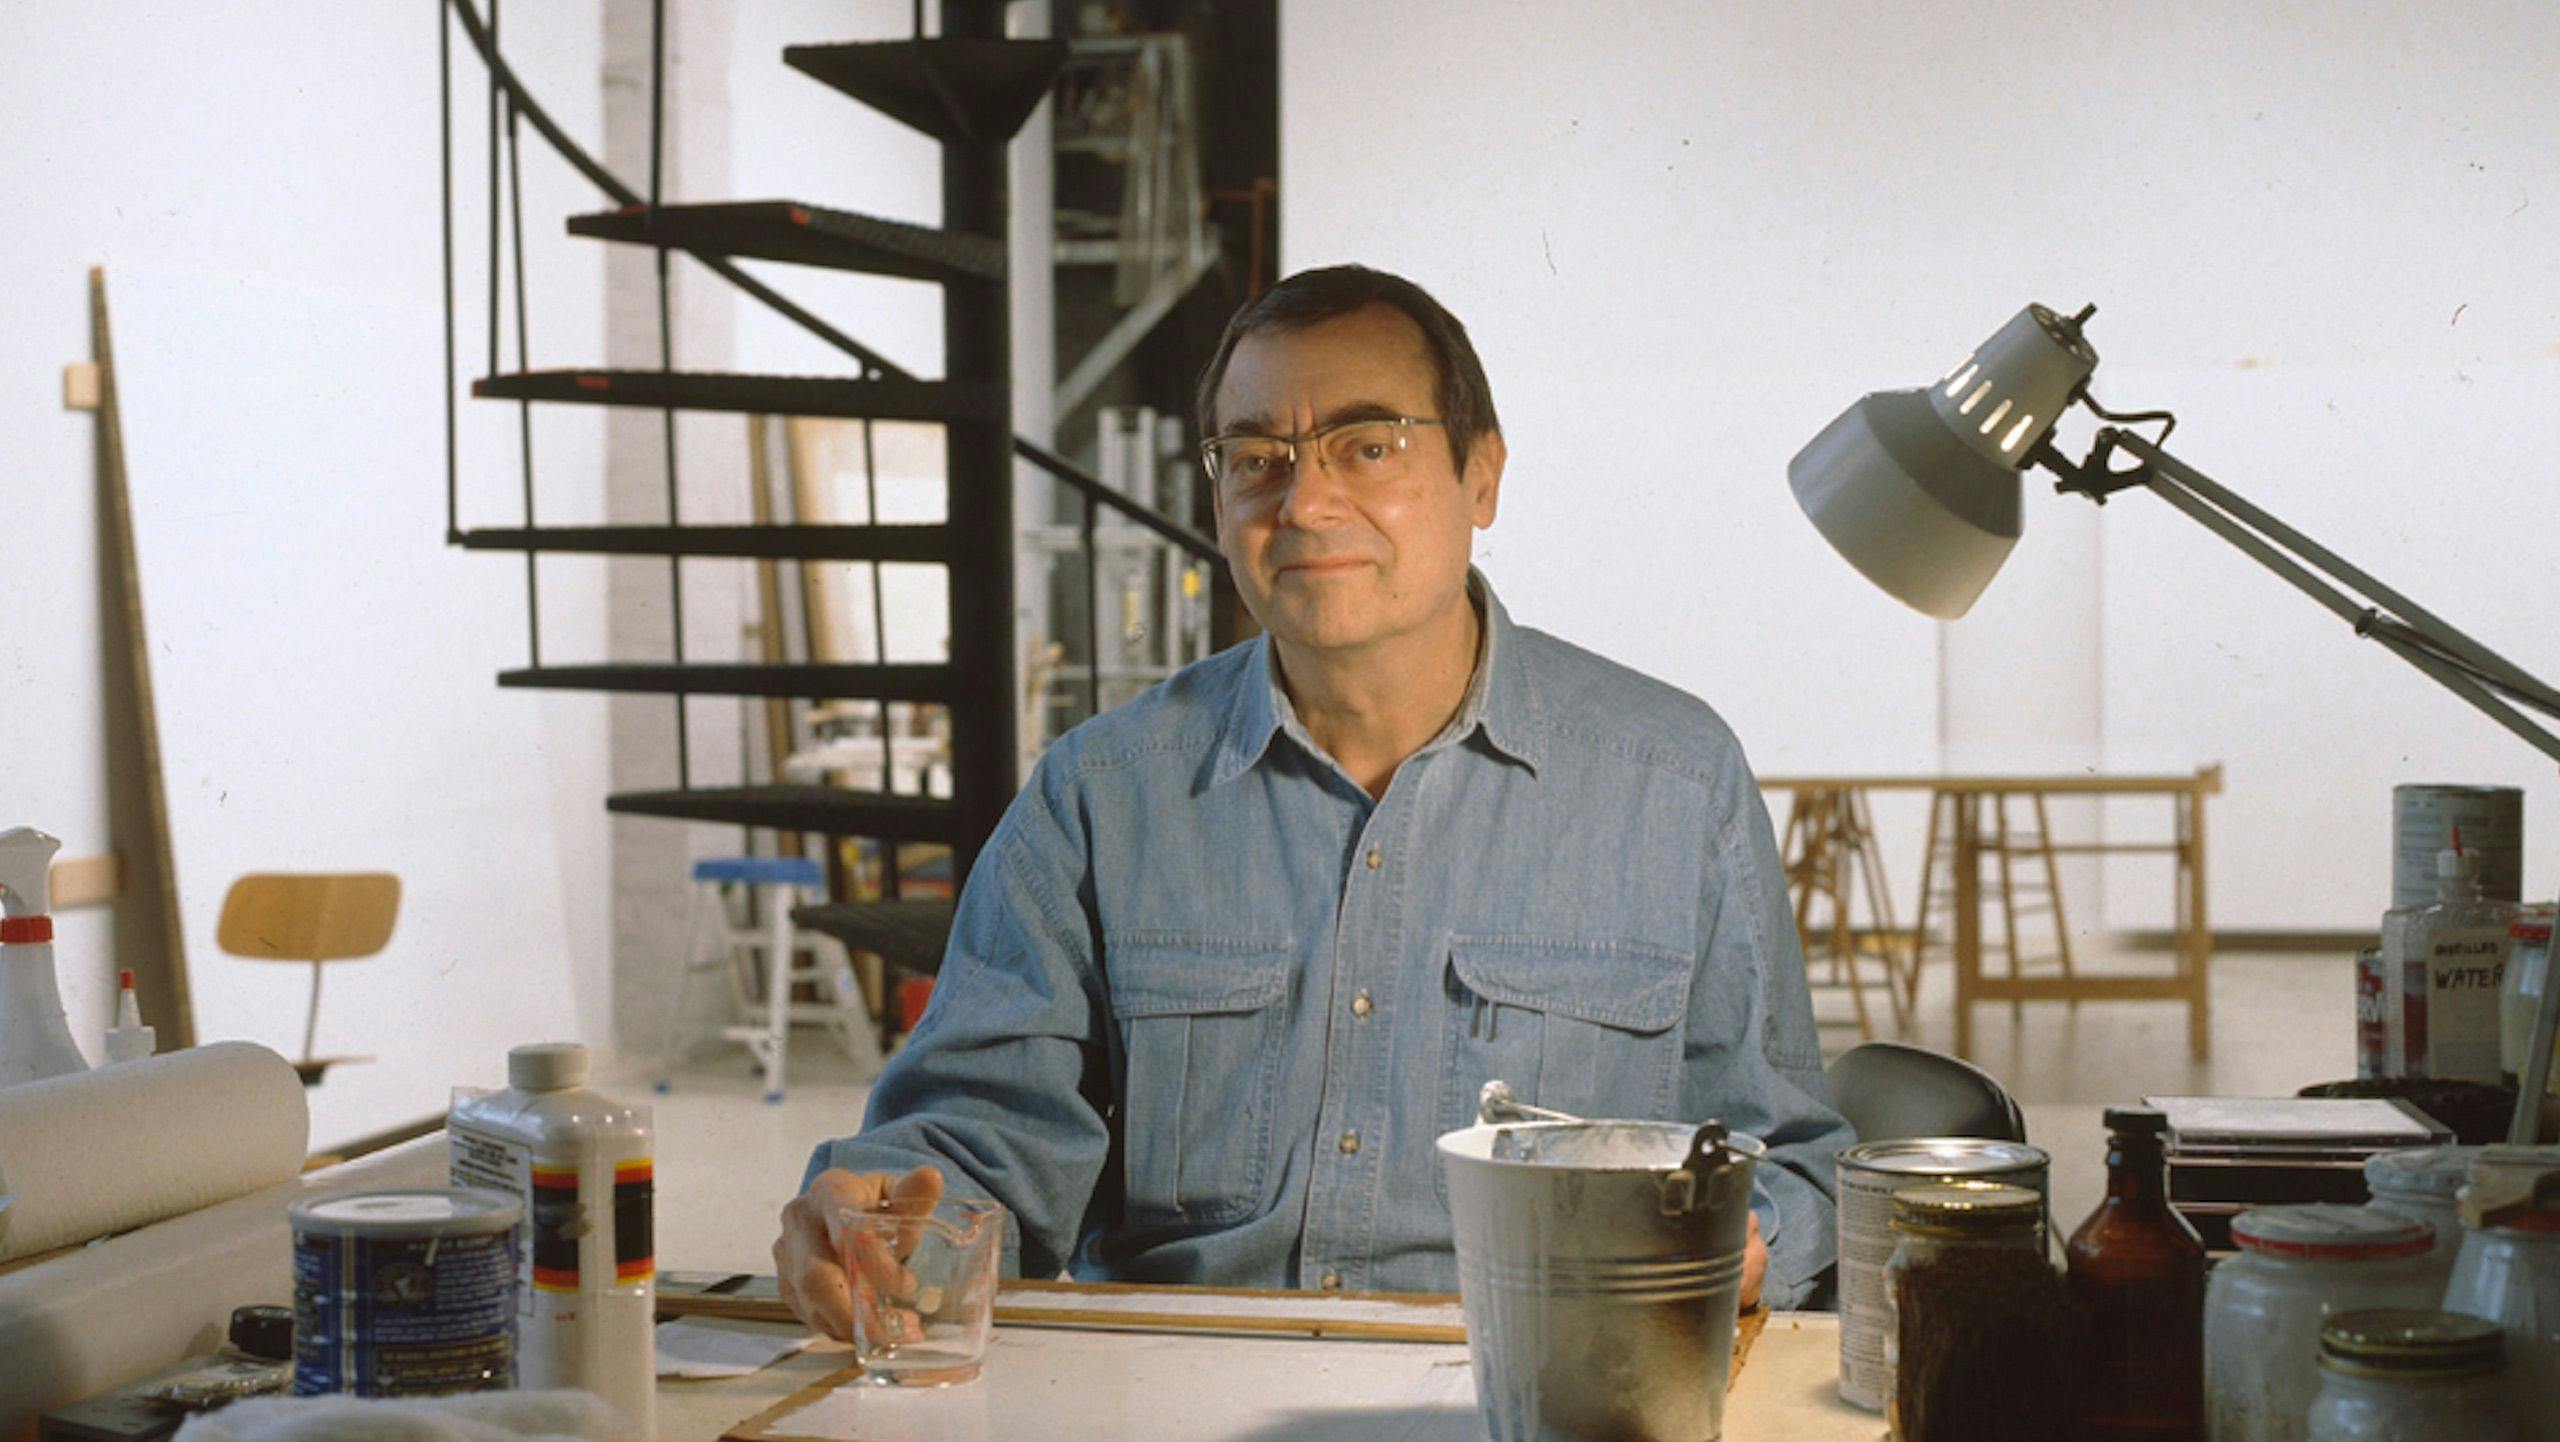 Photograph of Robert Ryman in his studio by Jacobson Studio, dated 1998.